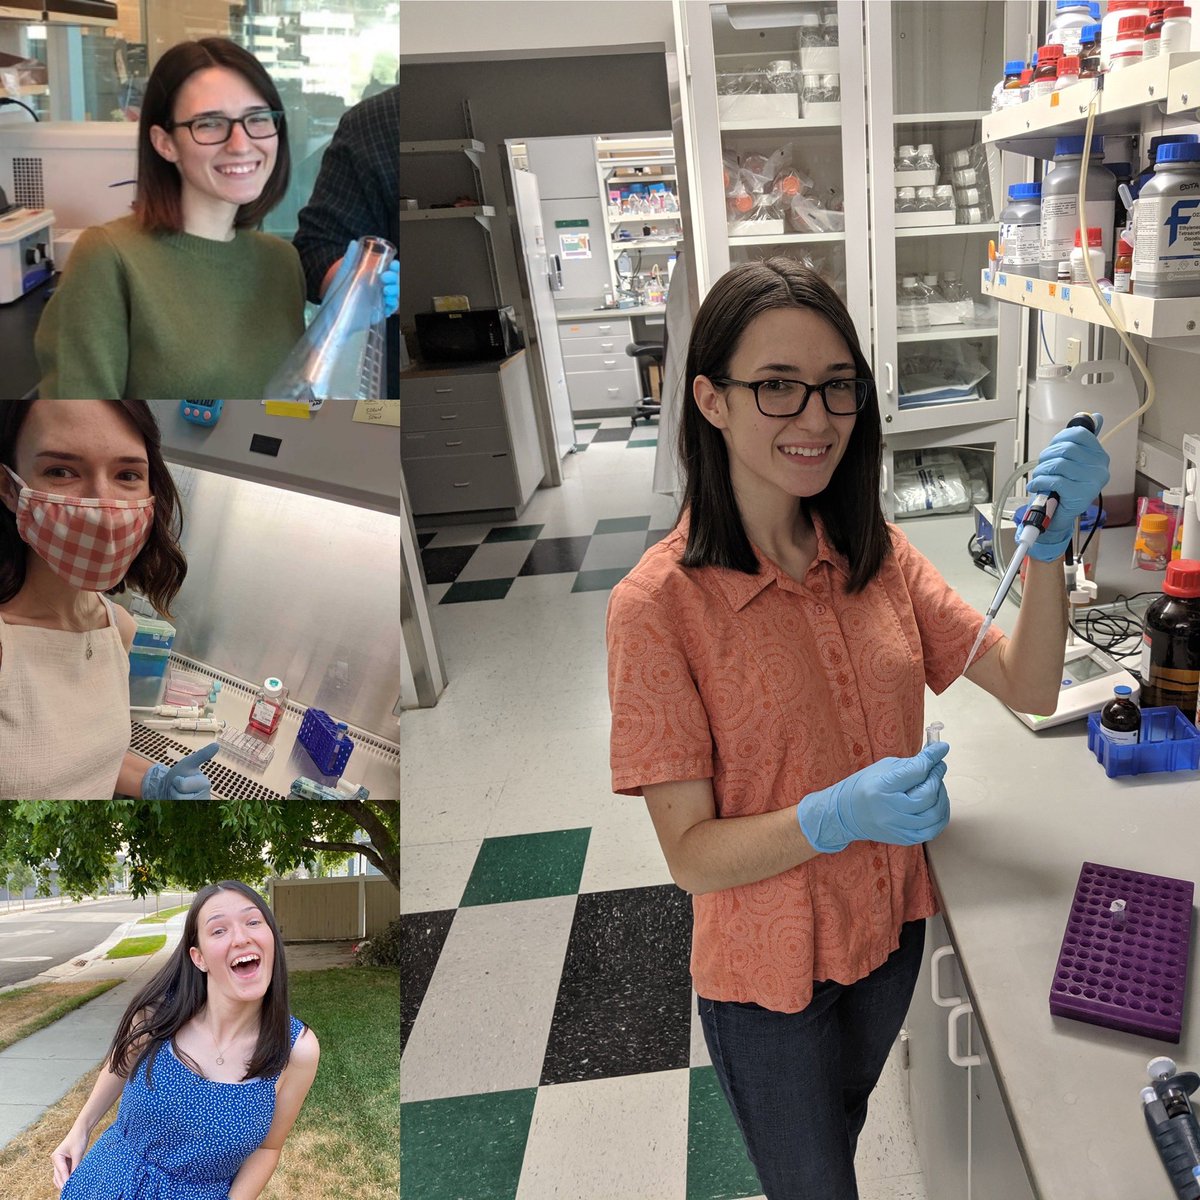 A very big congratulations to @Kylie_Persson for receiving an #NSFGRFP! Kylie was a superstar @UtahBME undergrad in my lab and is now a PhD student in the @fischbcl17 lab at @CornellBME. I’m gushing with pride! 😊 #favoritepartofmyjob